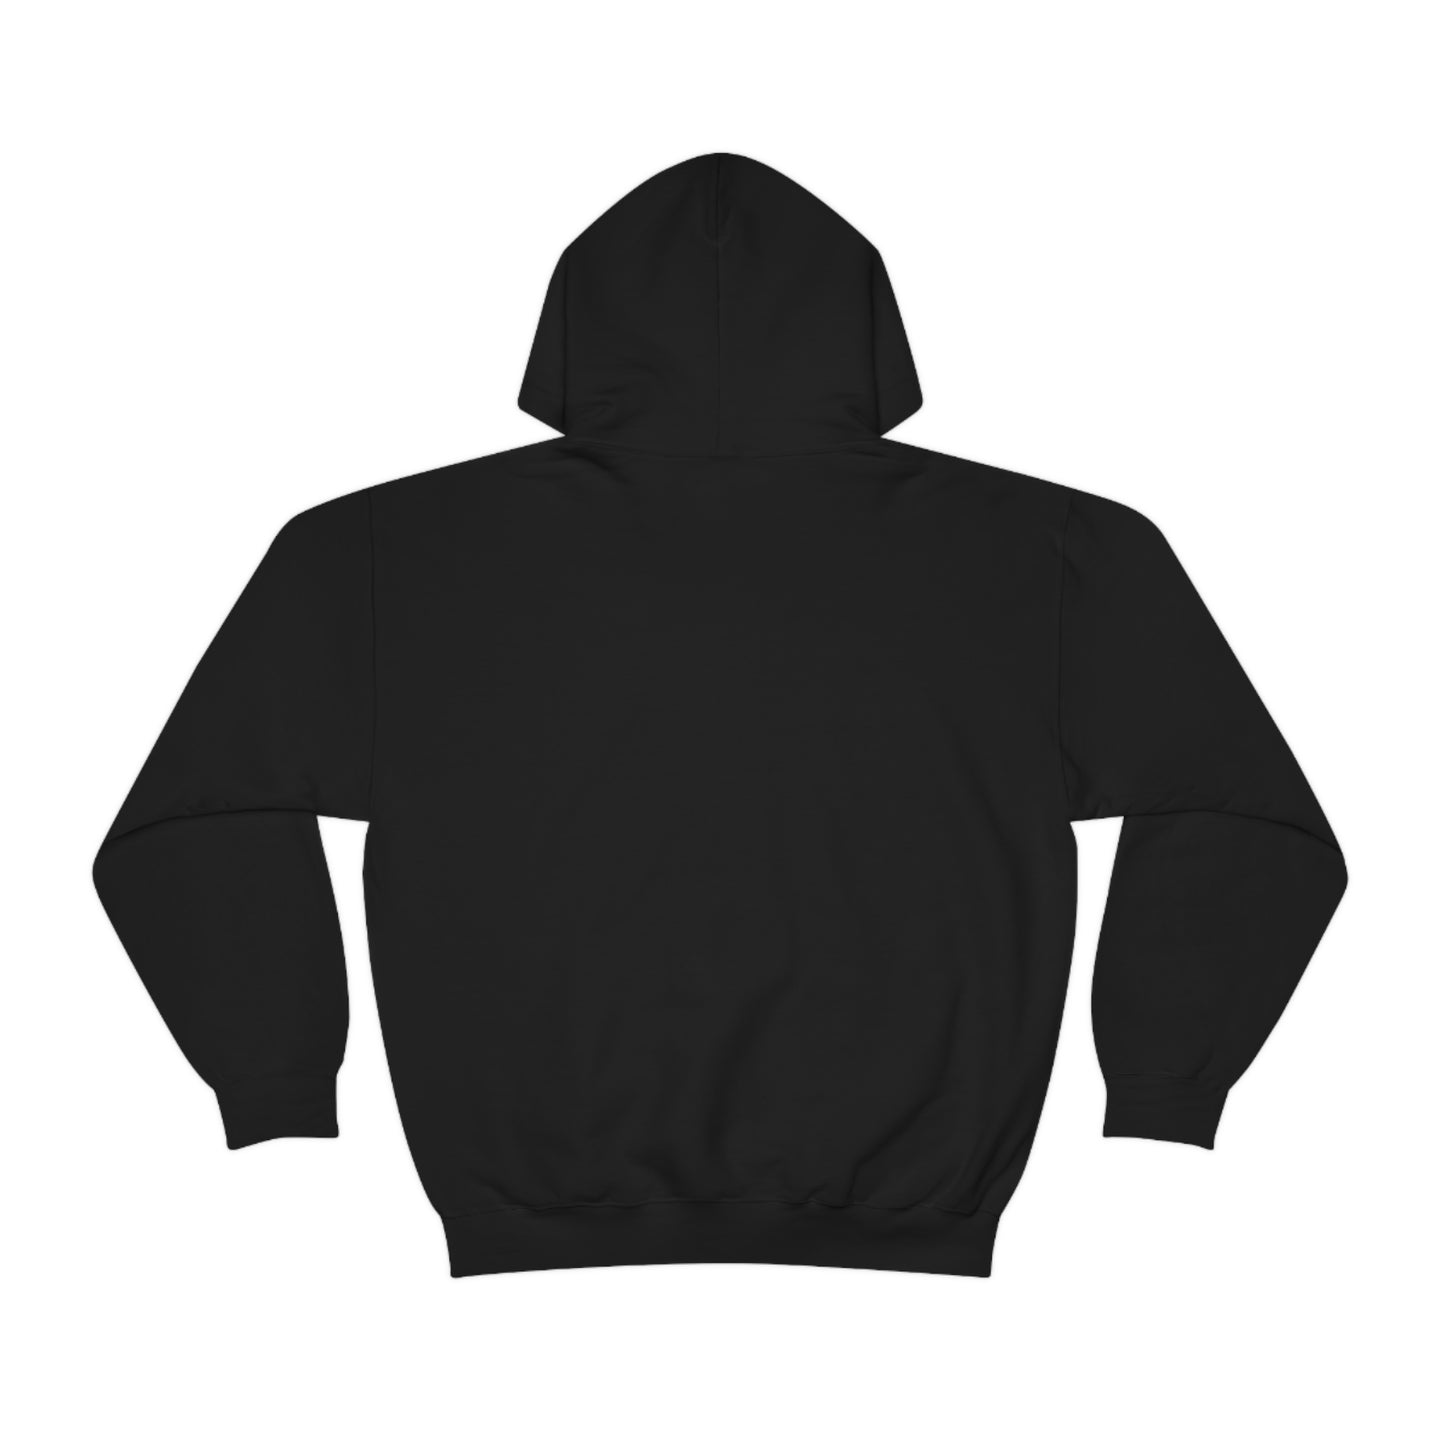 Your Ancestors Prayed For You Hoodie